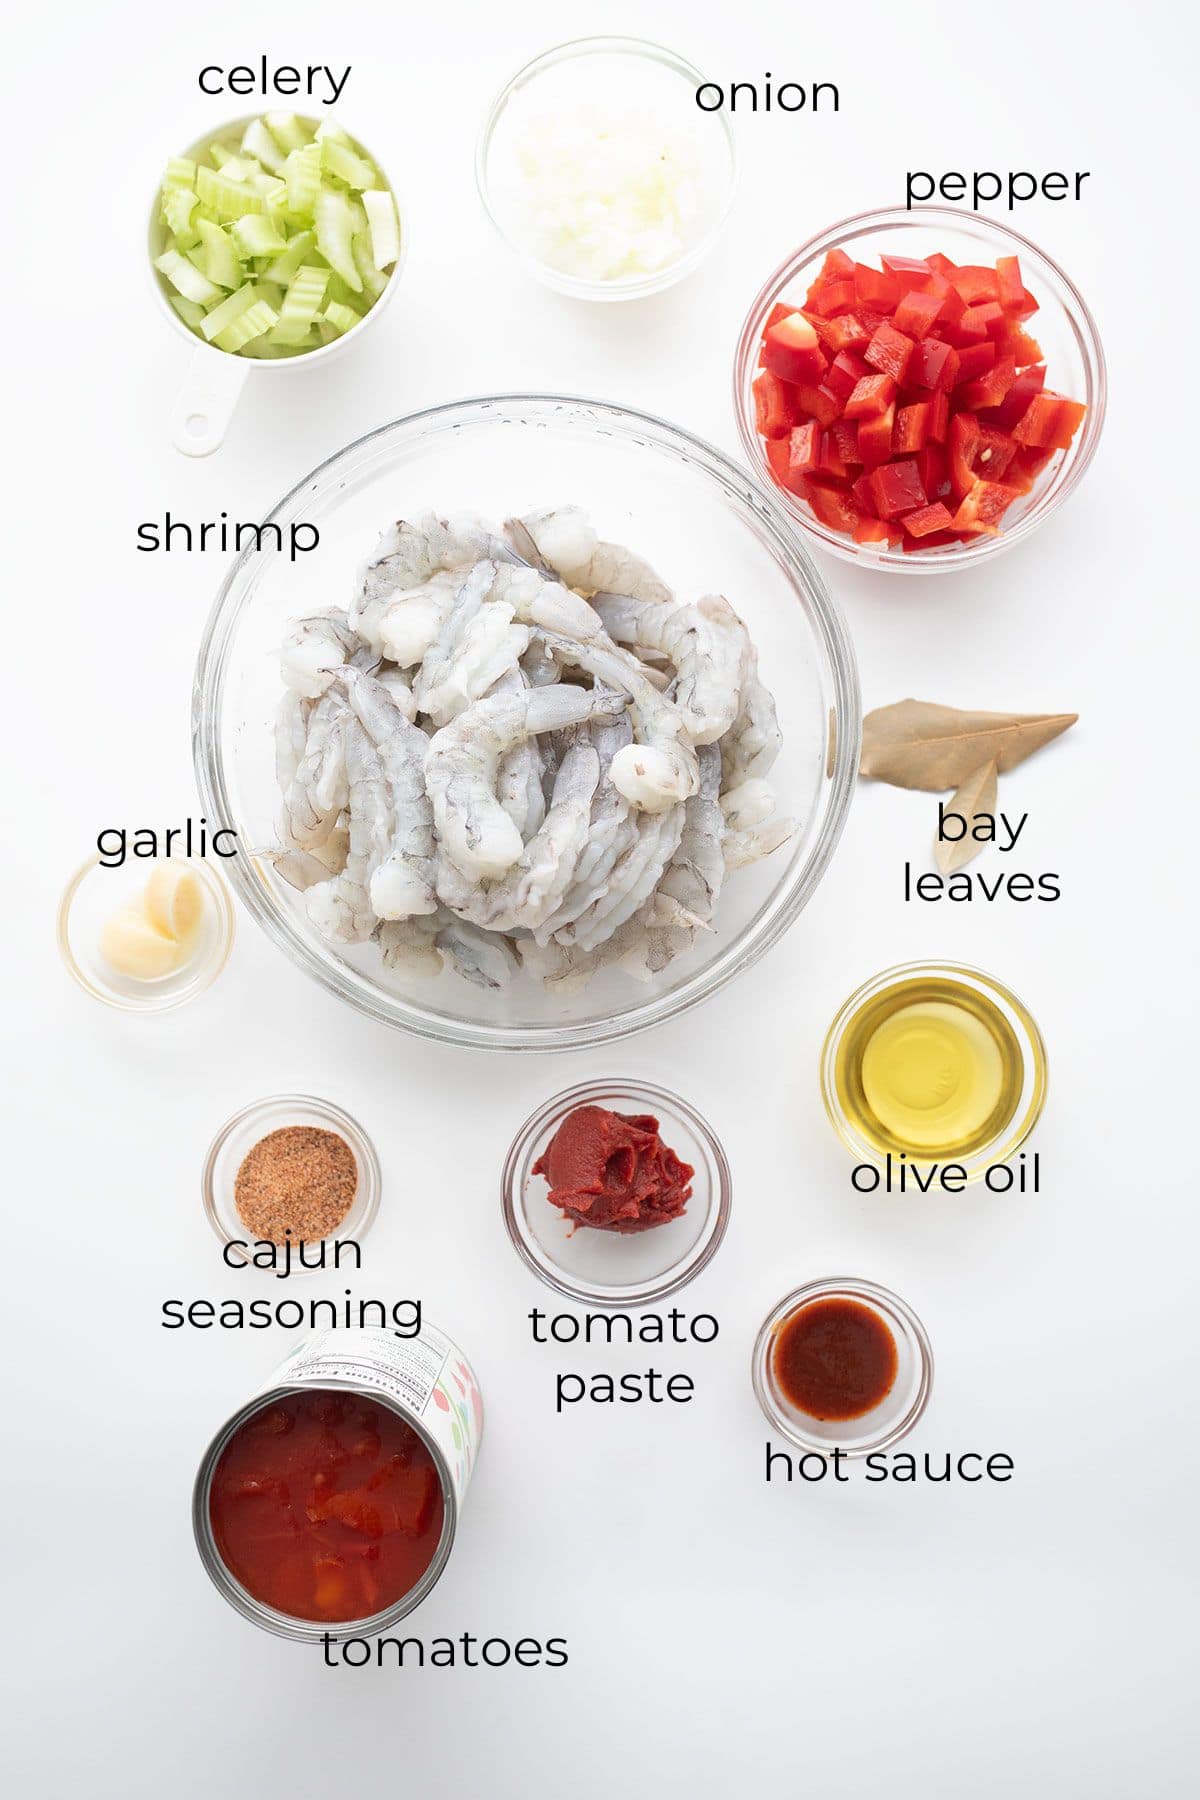 Top down image of ingredients needed for Shrimp Creole.